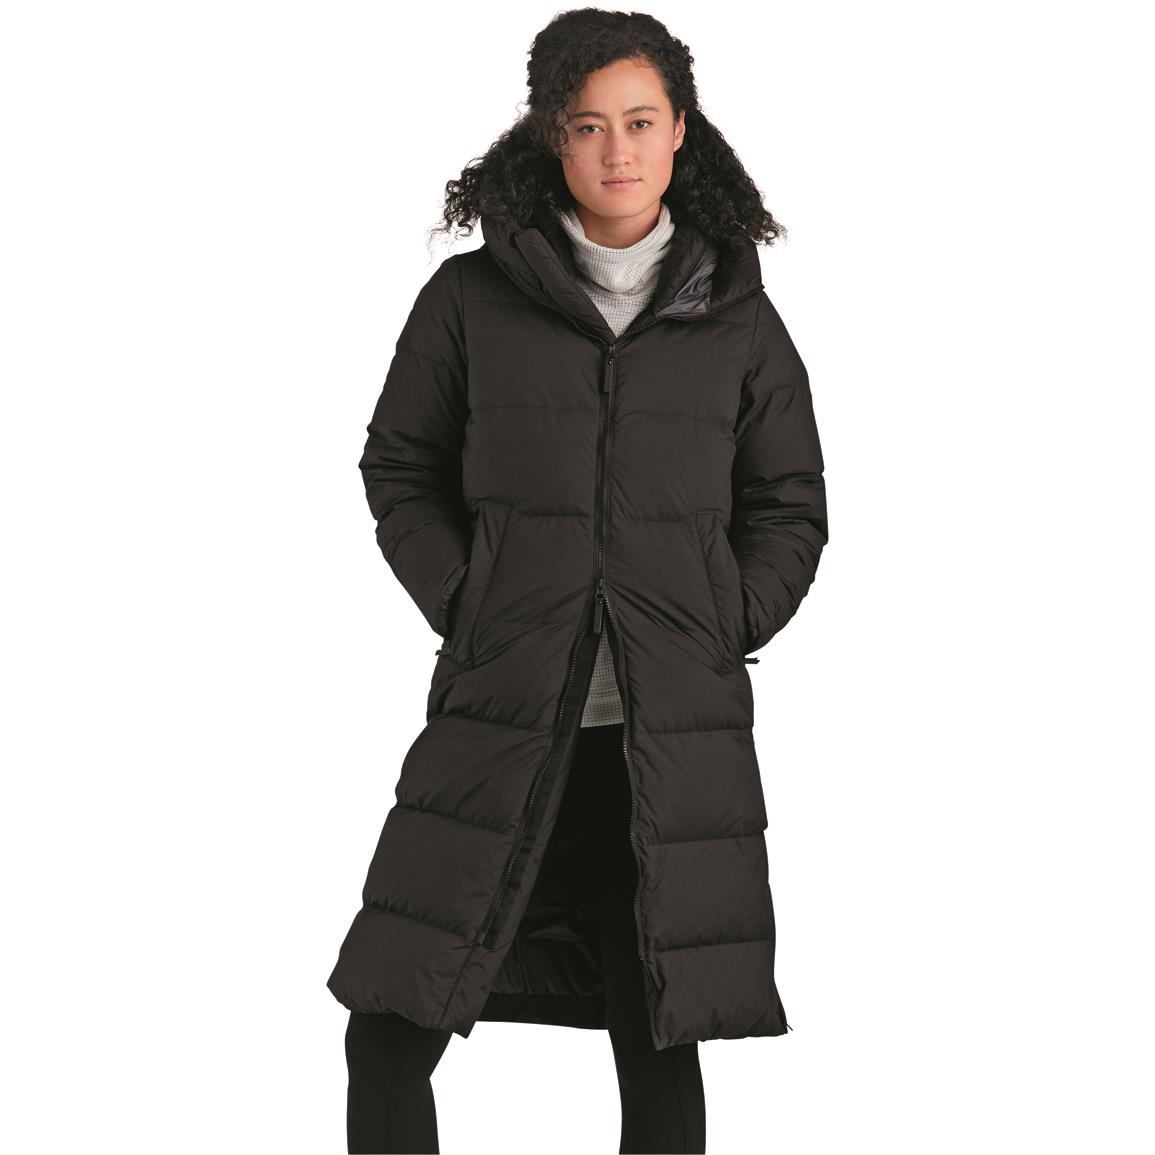 Outdoor Research Women's Coze Down Insulated Parka, Black